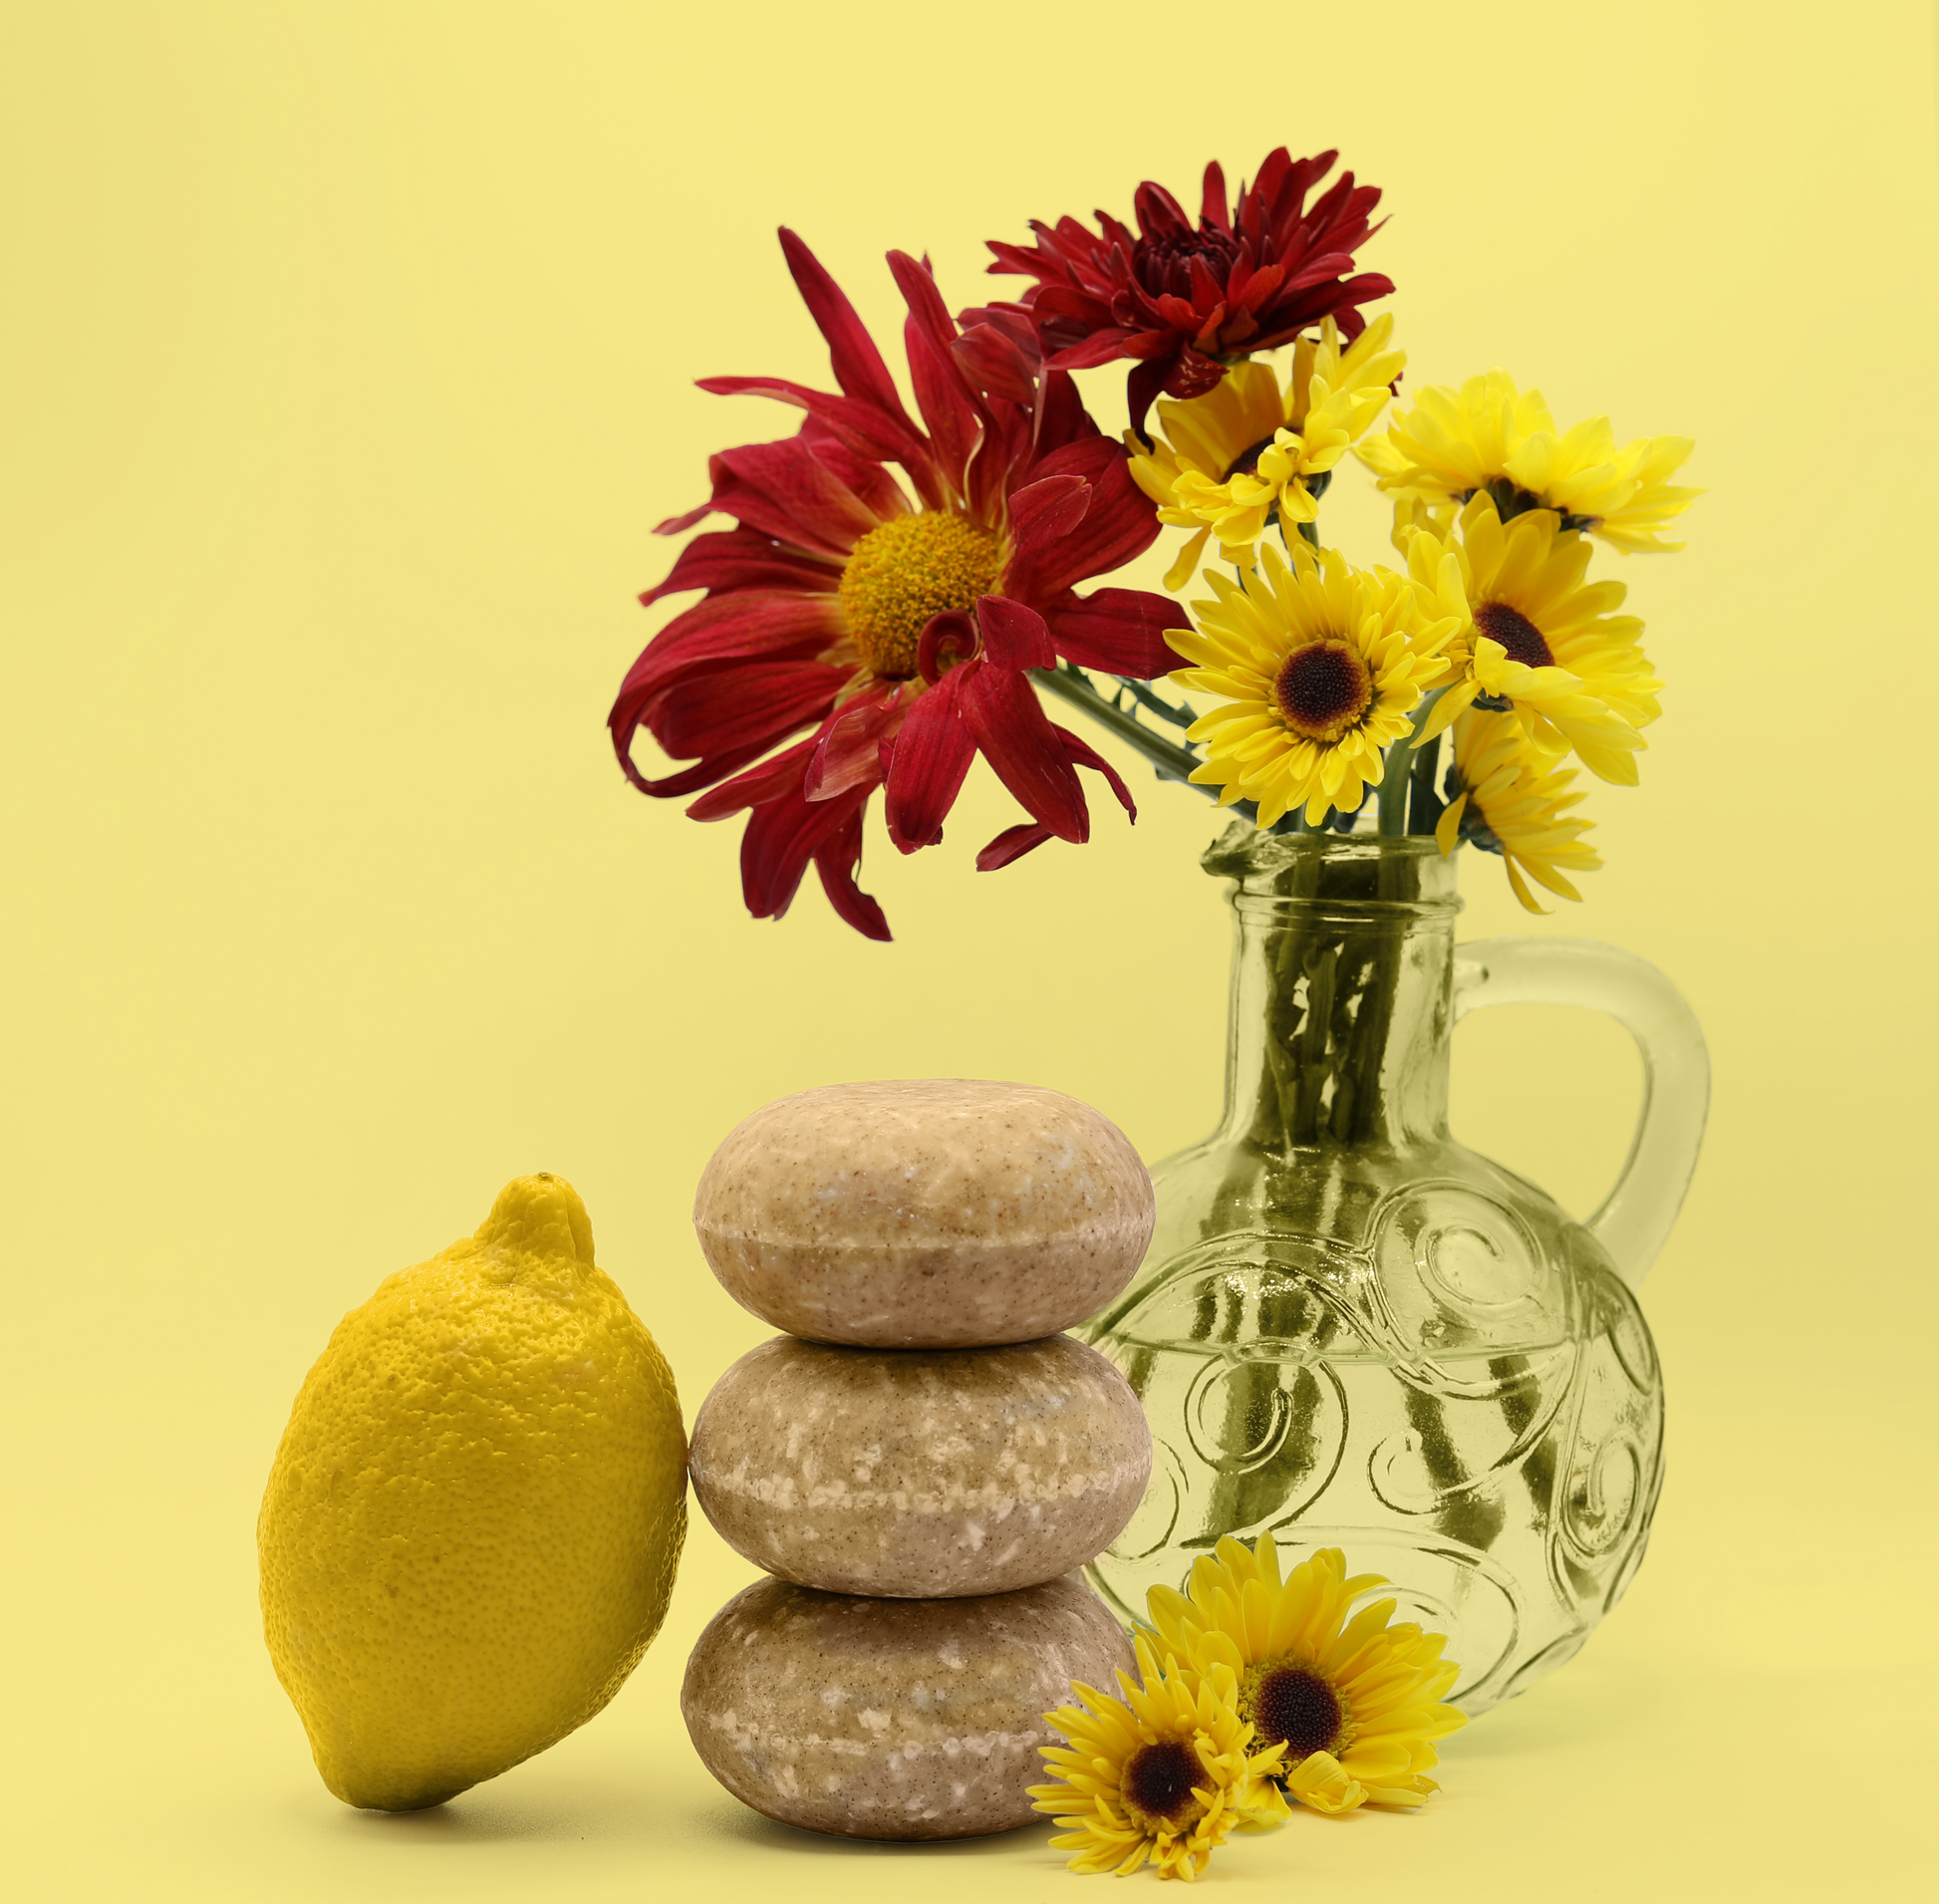 Three bars of the Blossom shampoo bars from Sun Basin Soap are stacked on top of each other. On one side is a lemon and the other is bouquet of red and yellow flowers. A Good Store subscription product.